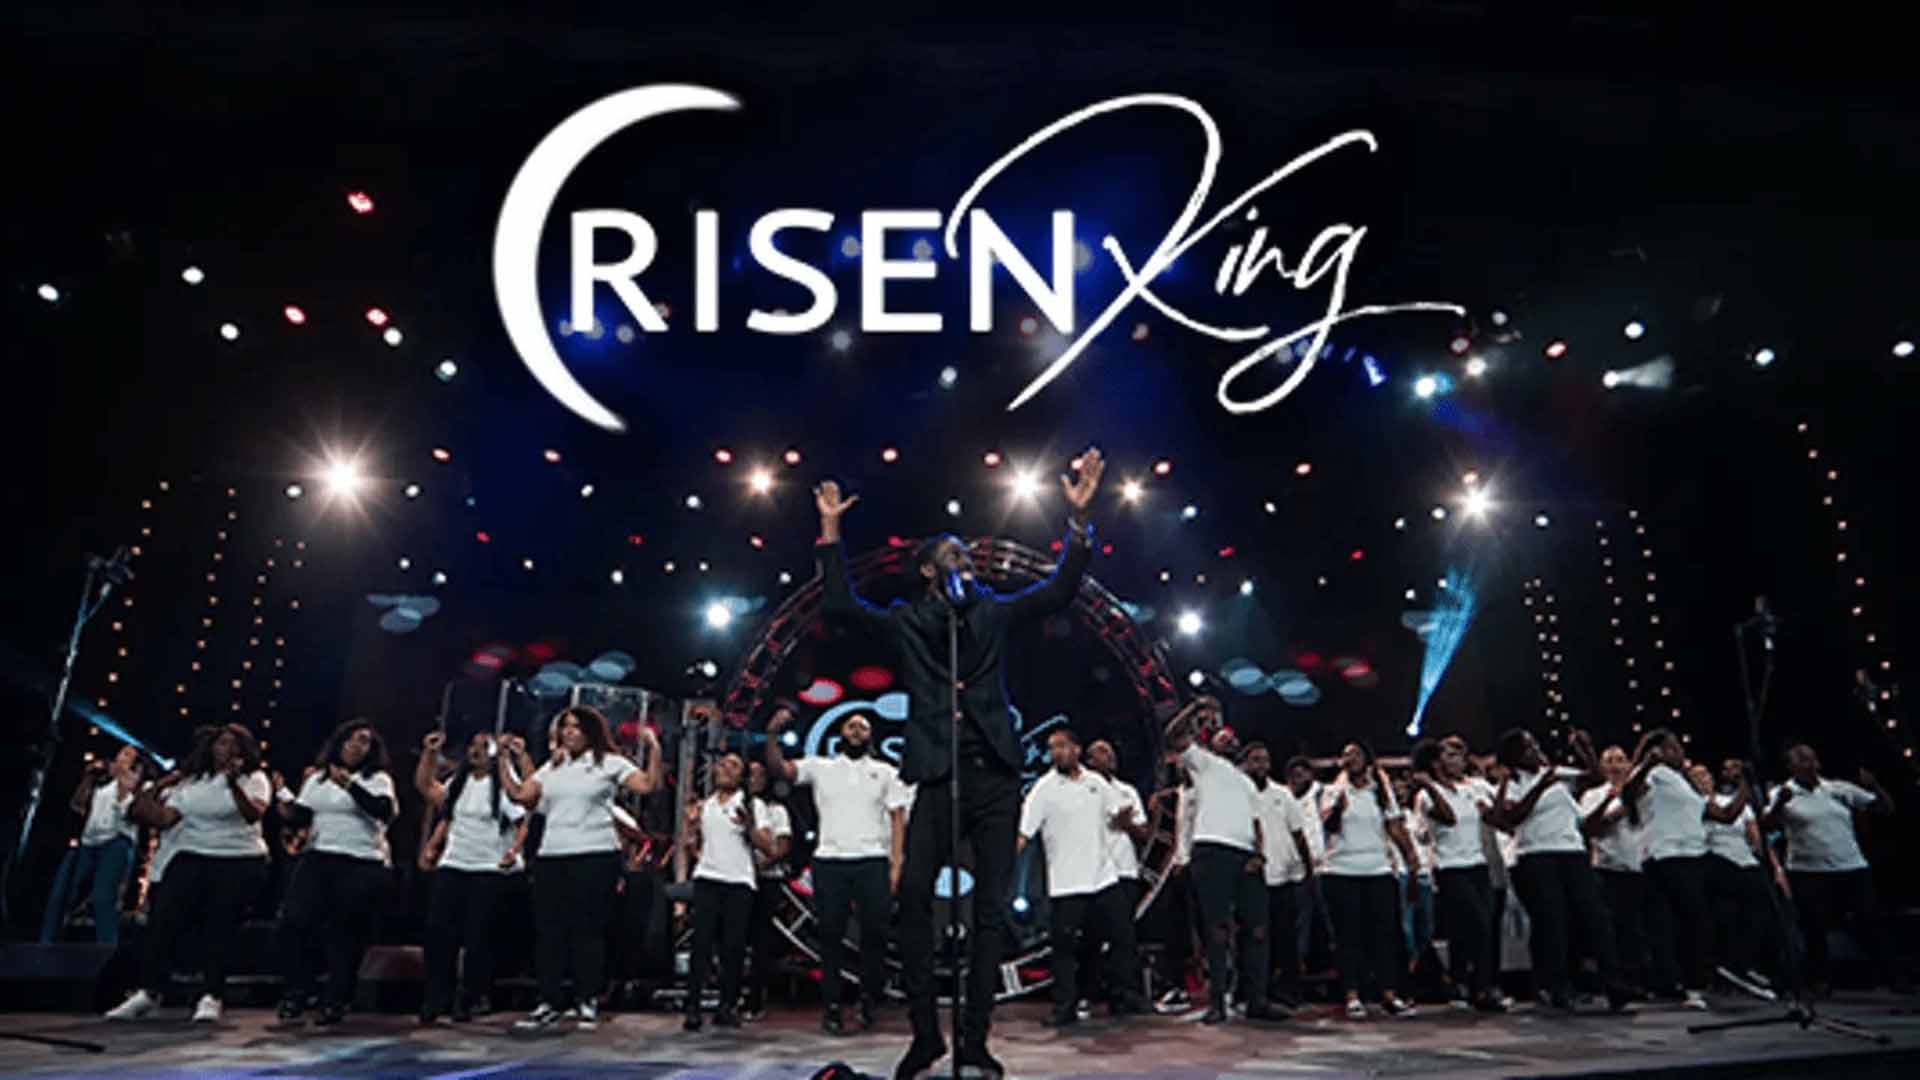 risen_king_an_easter_special_with_tye_tribbett.jpeg